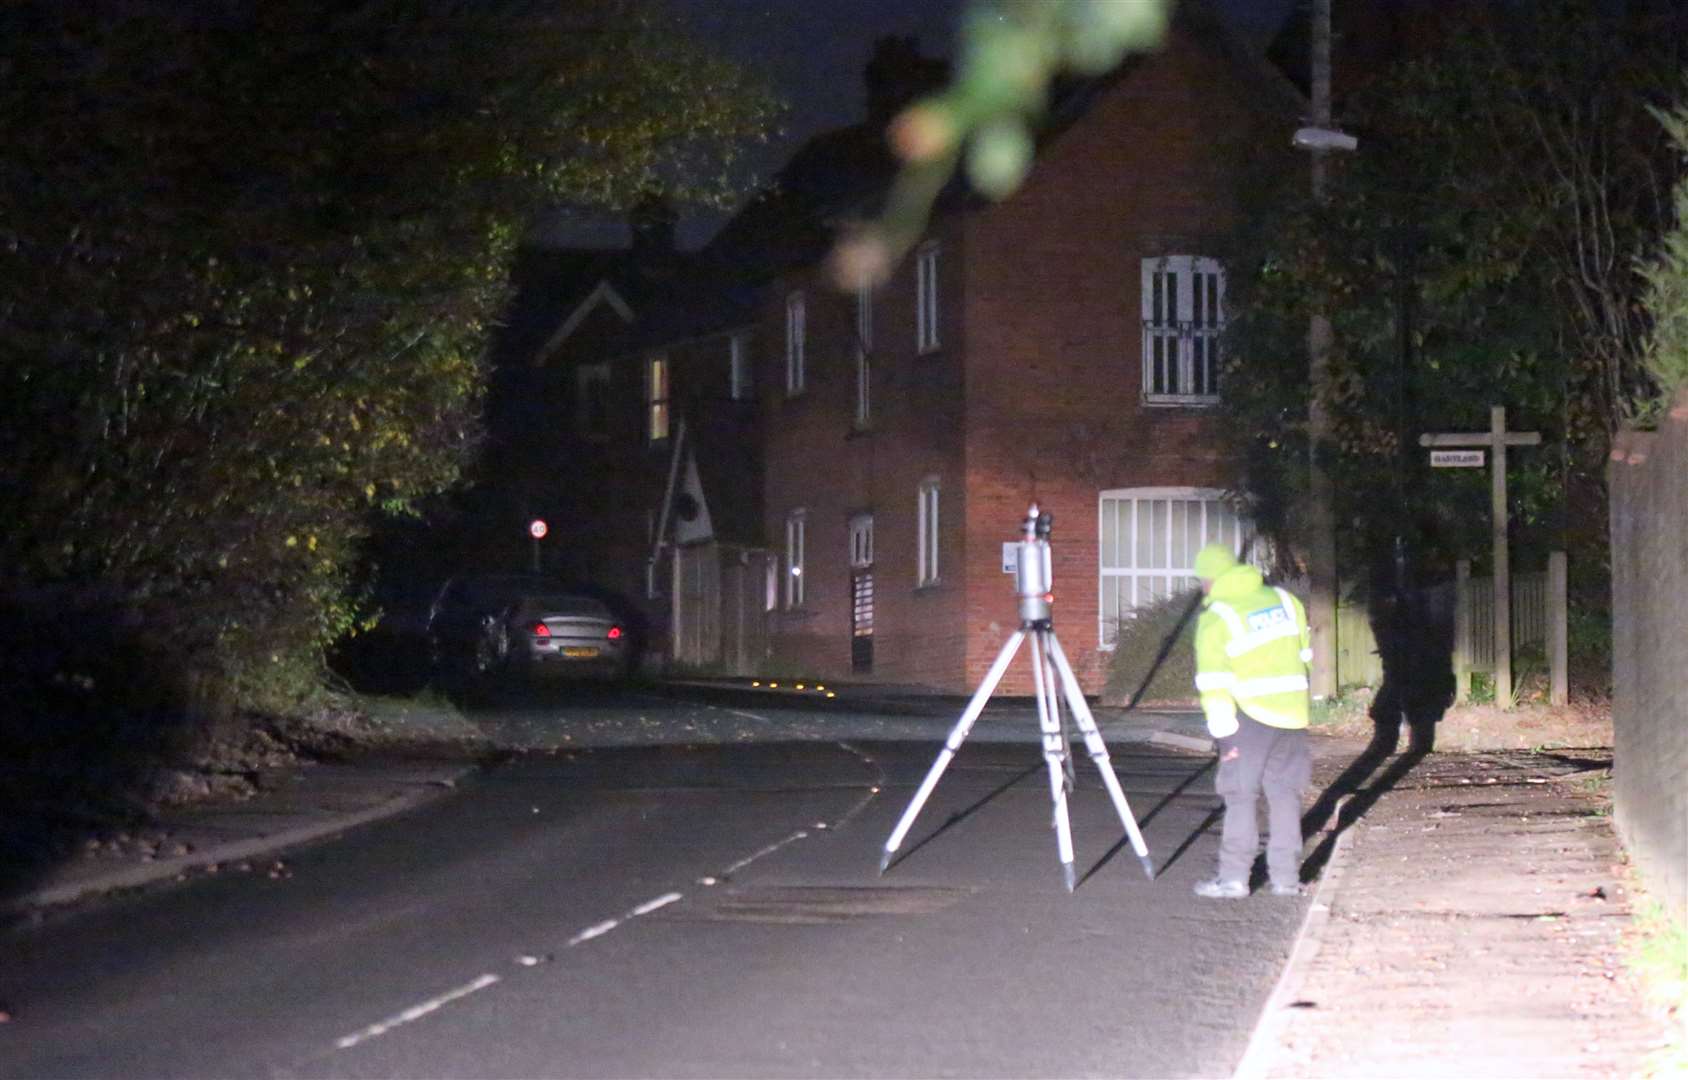 Police at the scene in Cranbrook Road, Hawkhurst. Picture: UKNIP